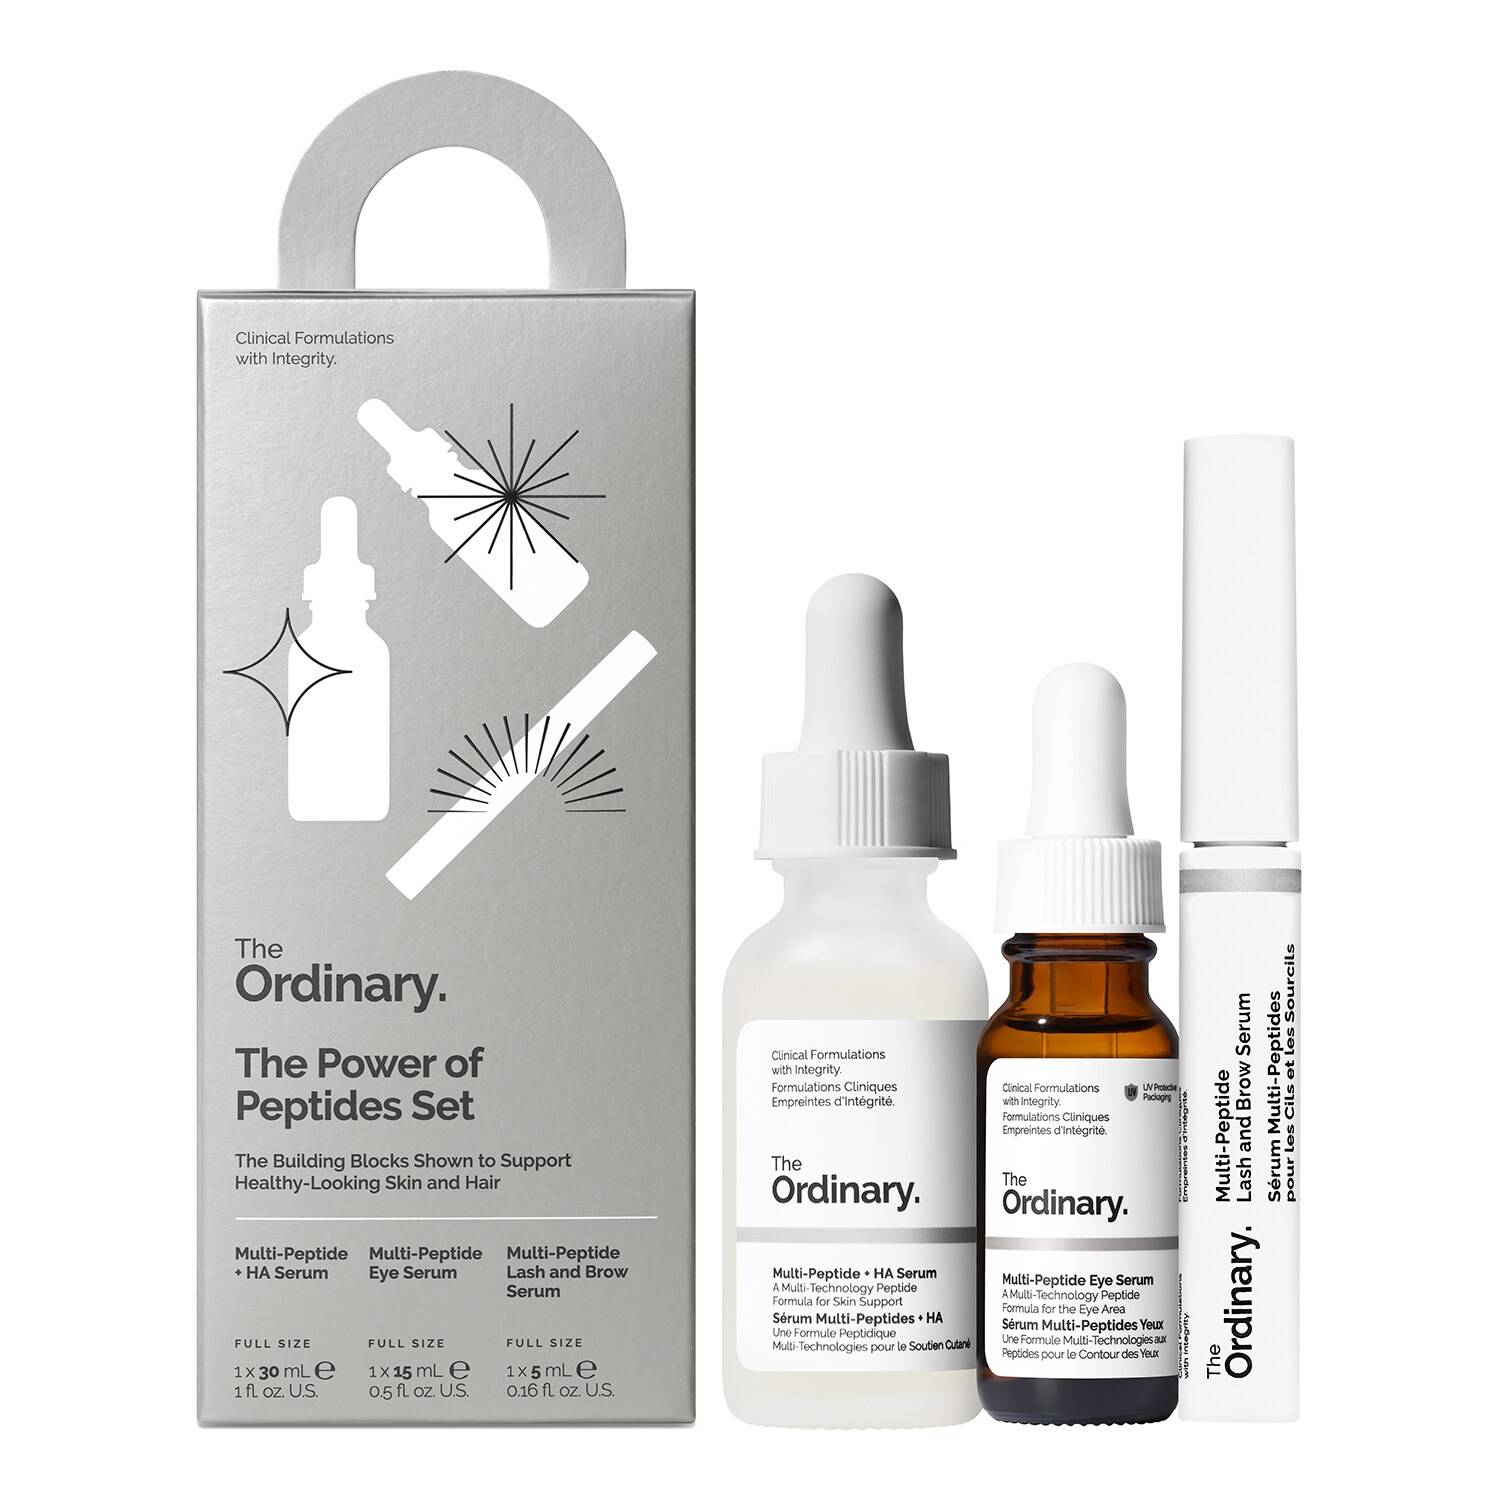 THE ORDINARY The Power of Peptides Set